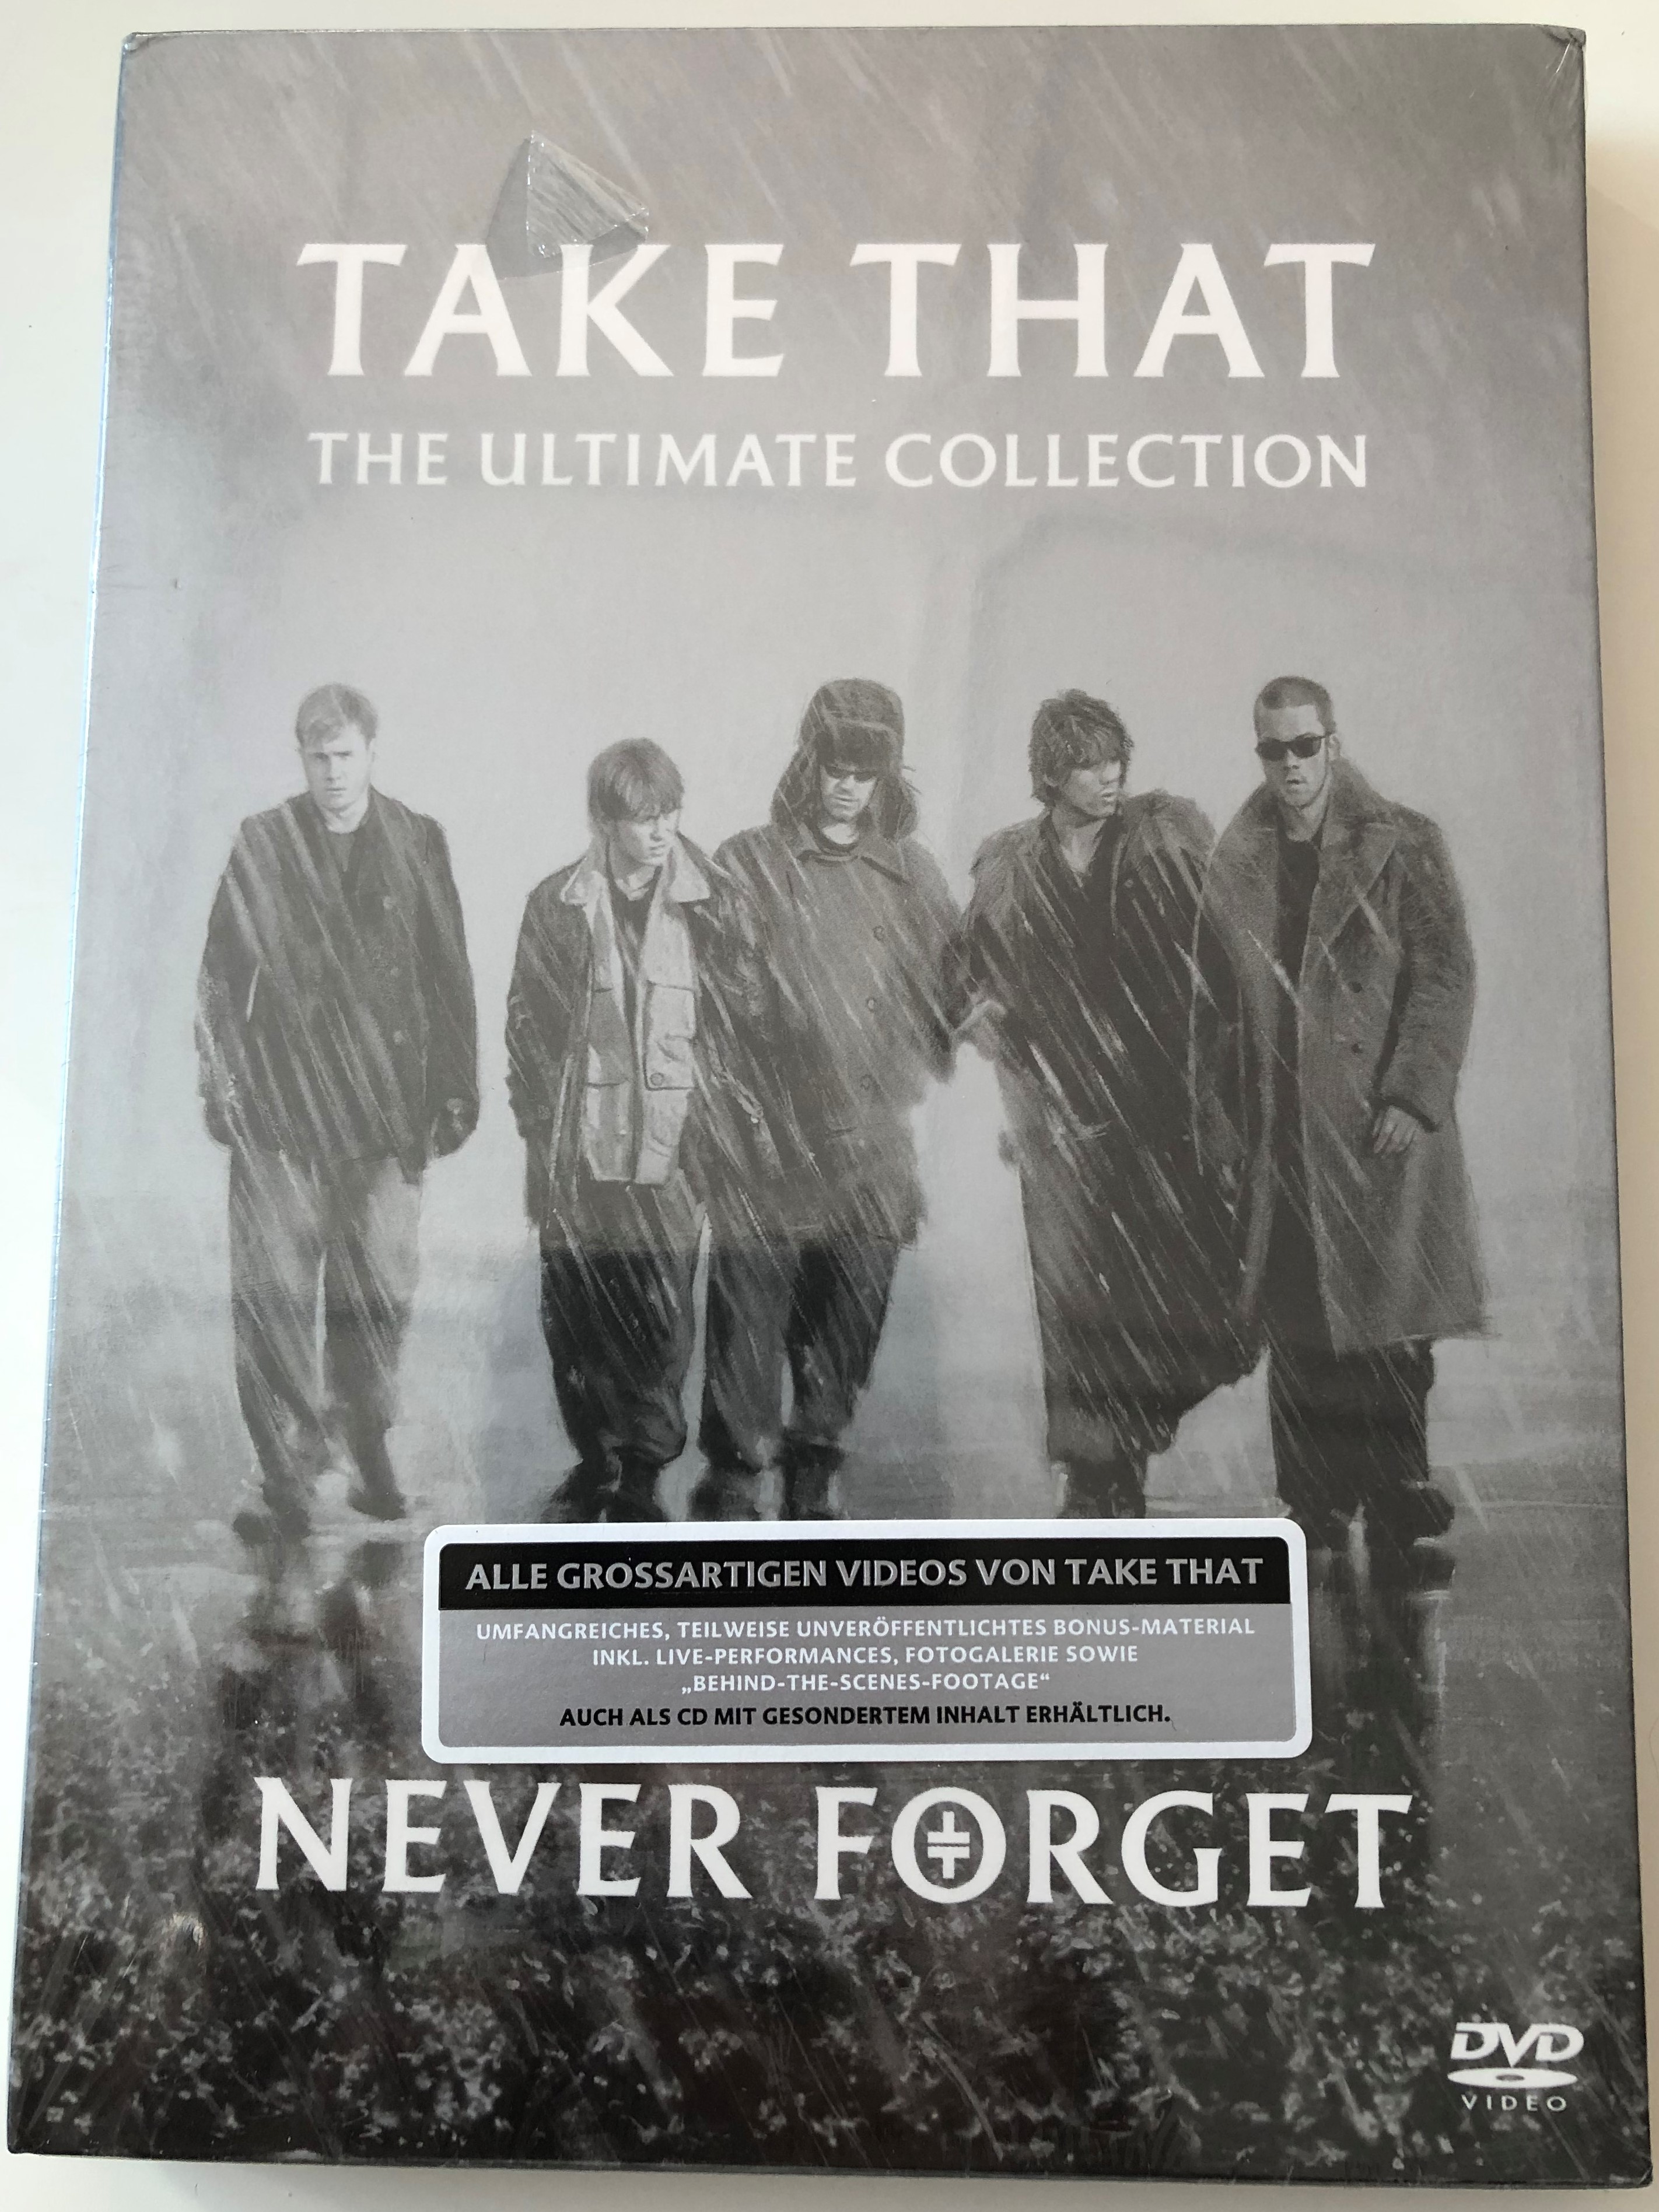 take-that-the-ultimate-collection-dvd-2005-never-forget-1.jpg